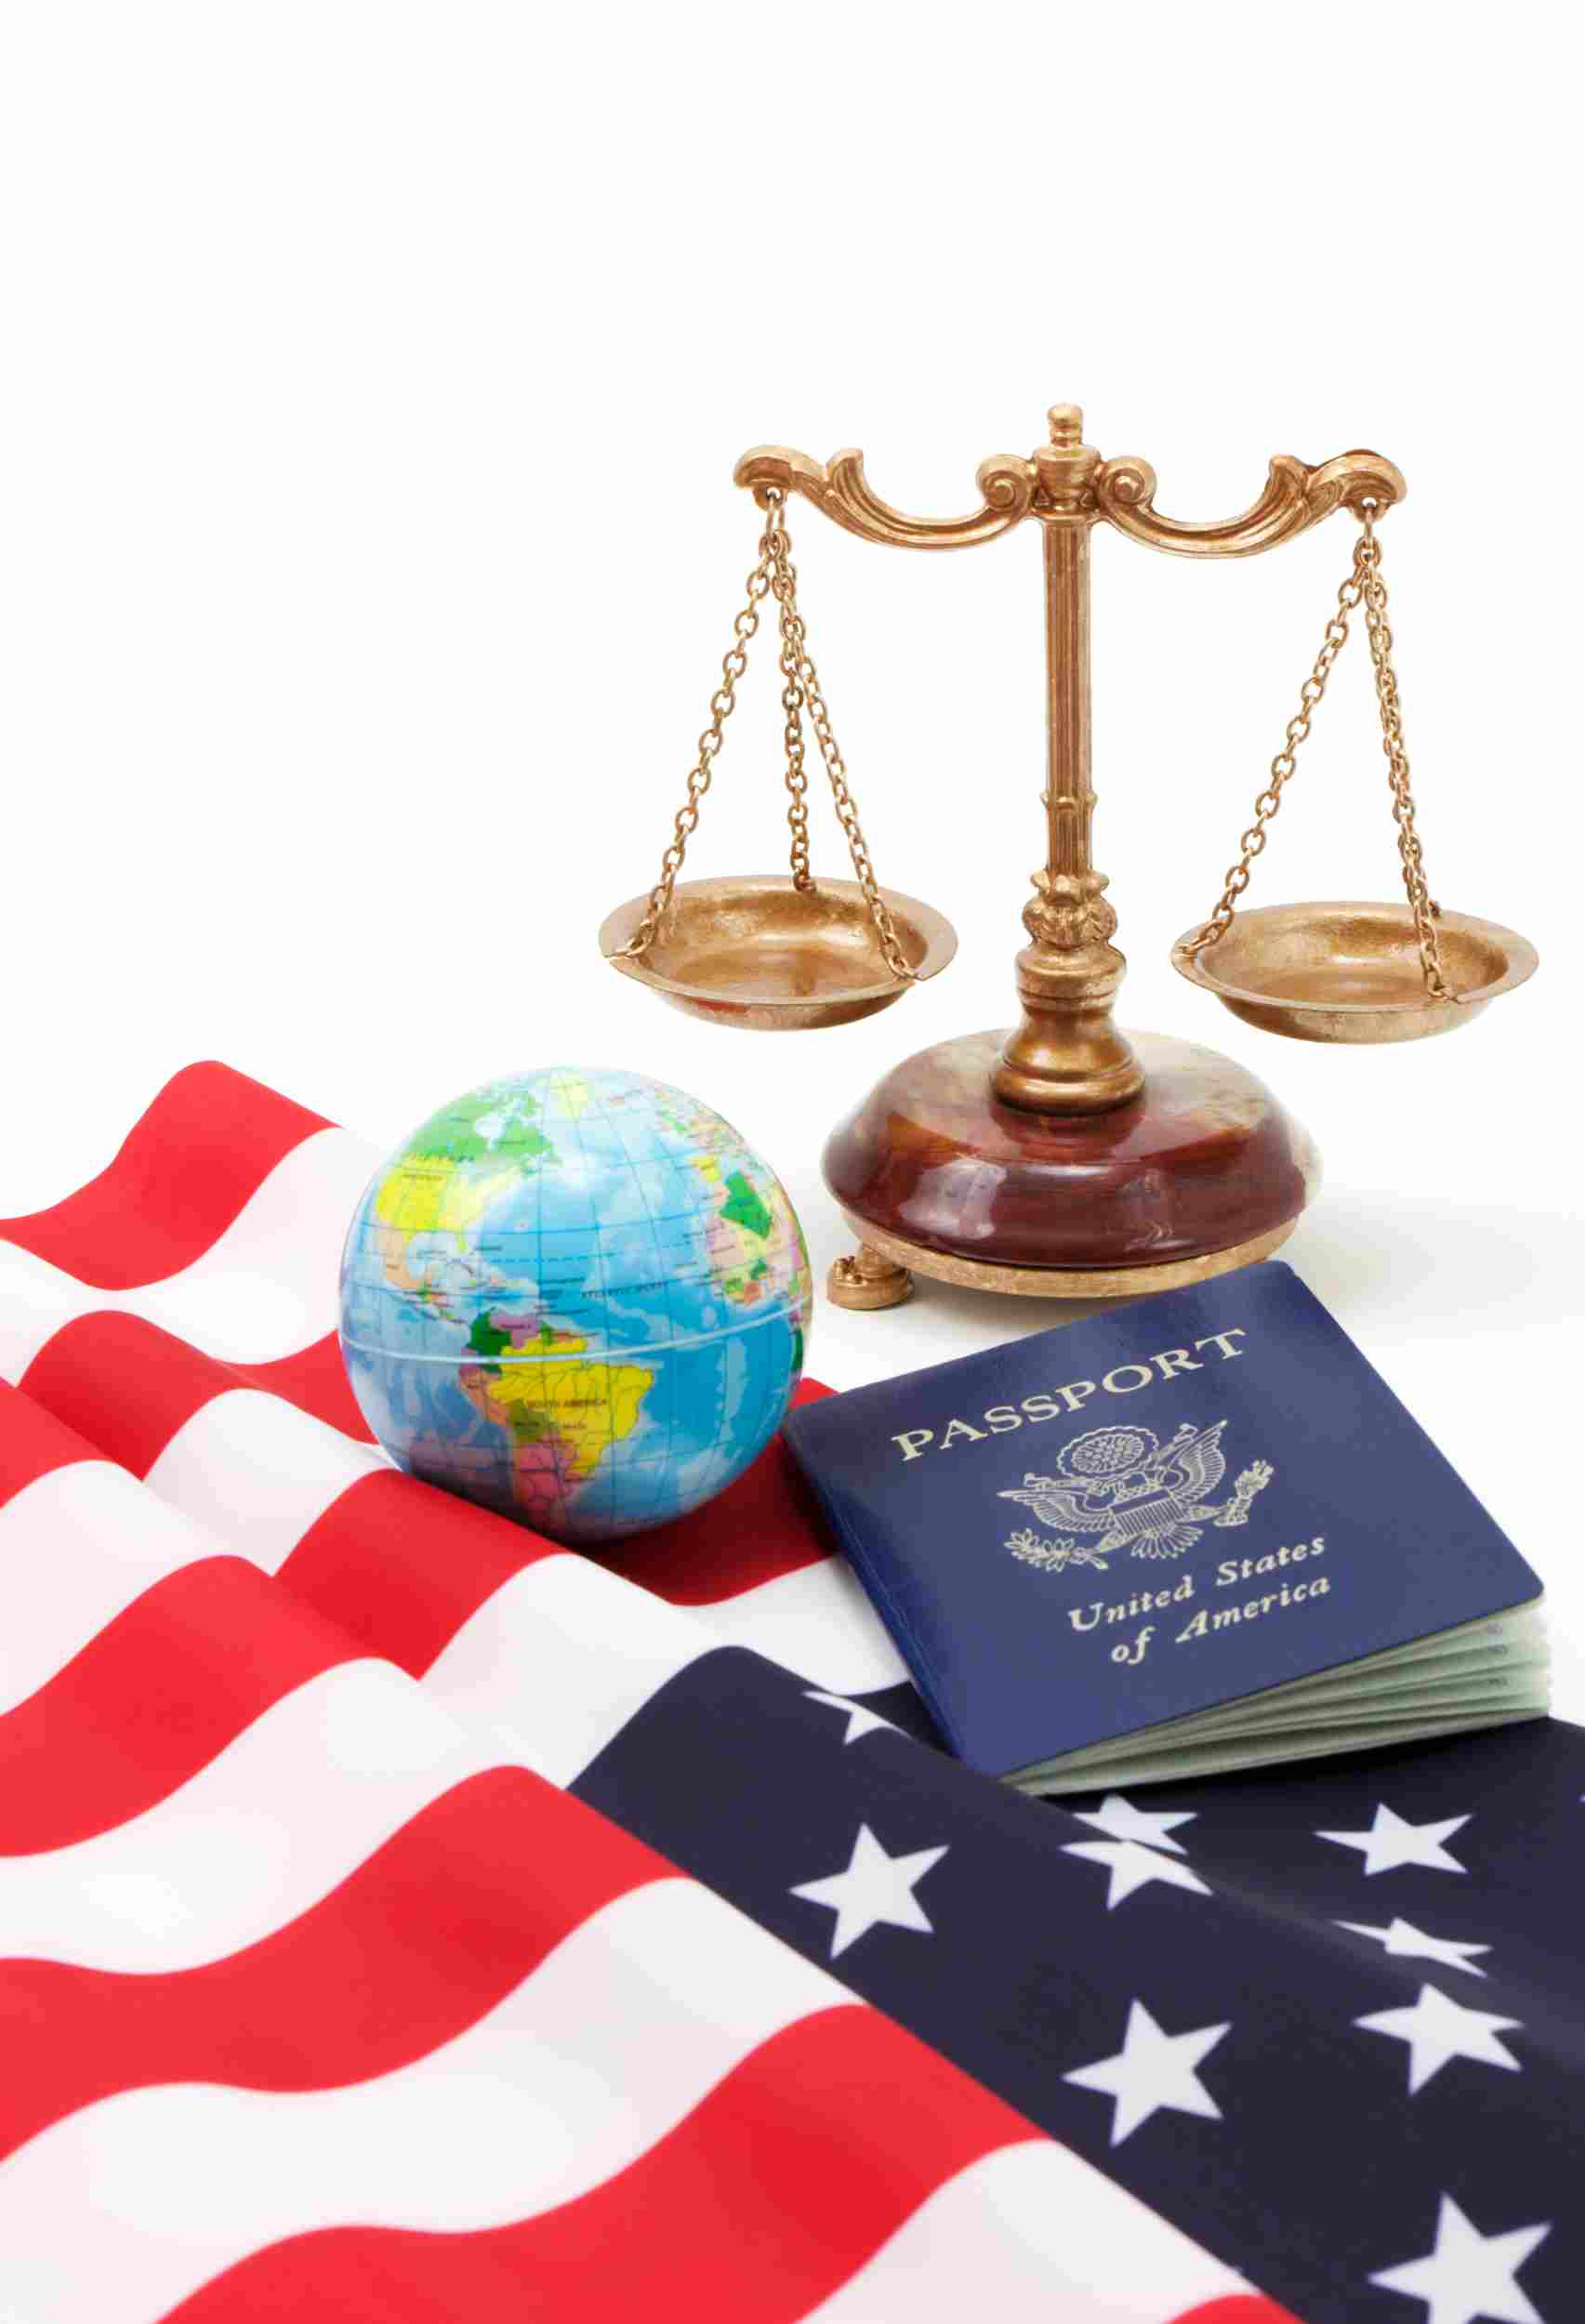 Immigration Lawyers: Finding the Right Advocate for Your Journey